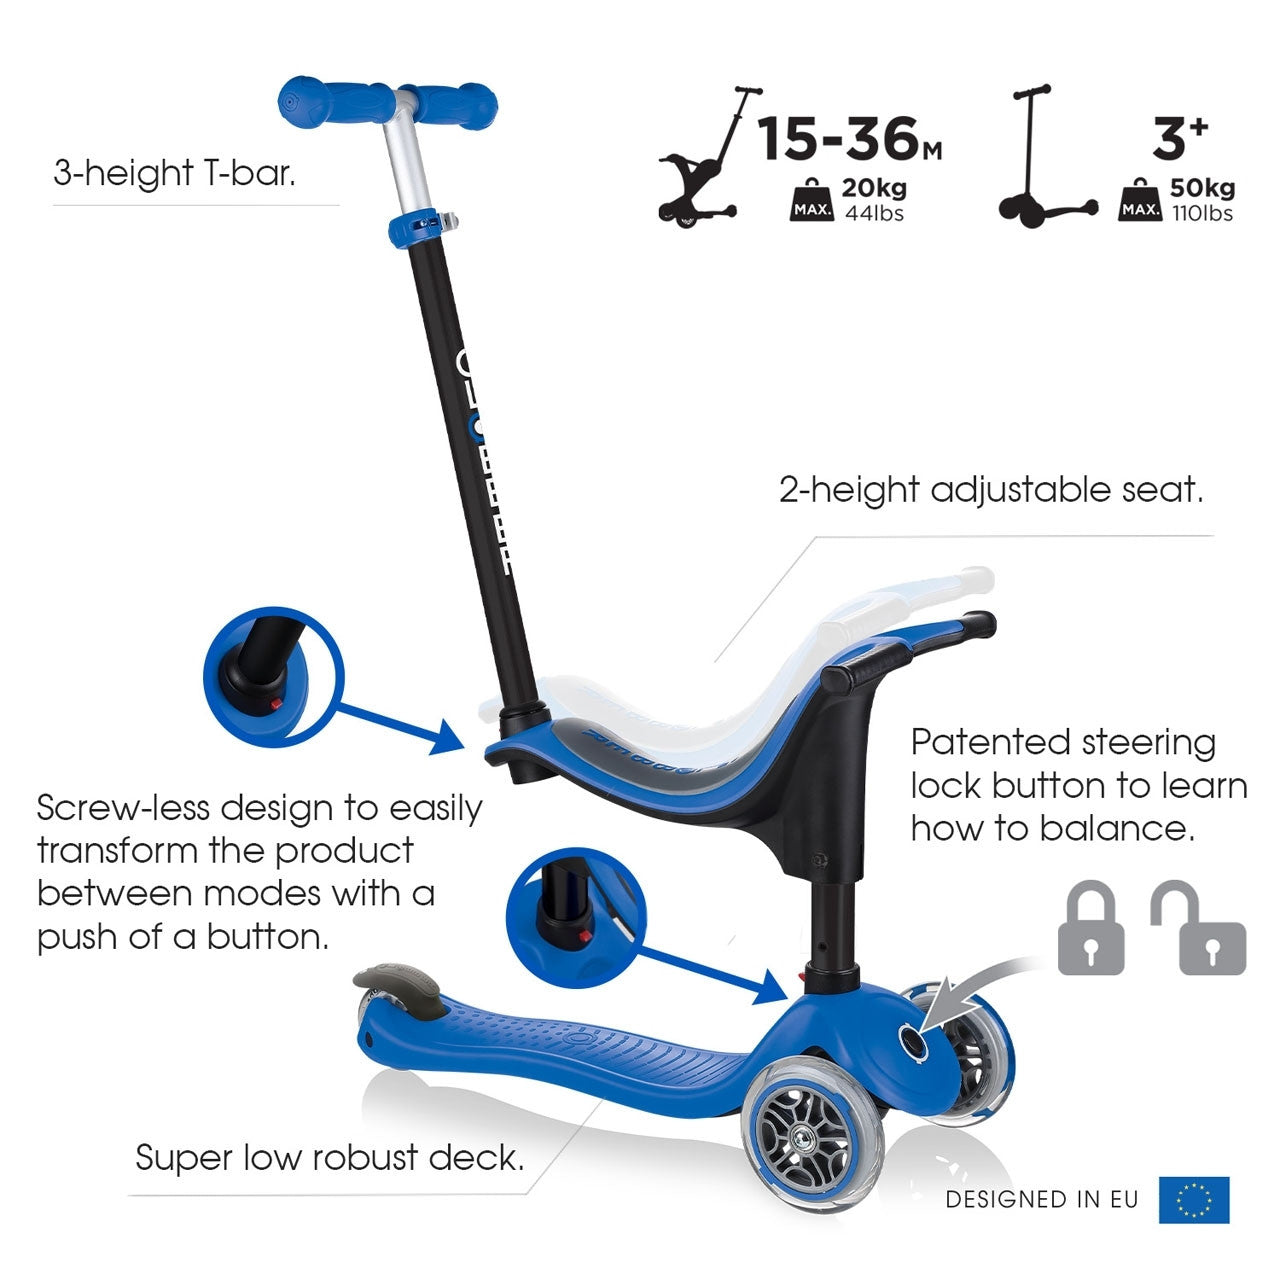 Globber GO UP Sporty Scooter - Mint